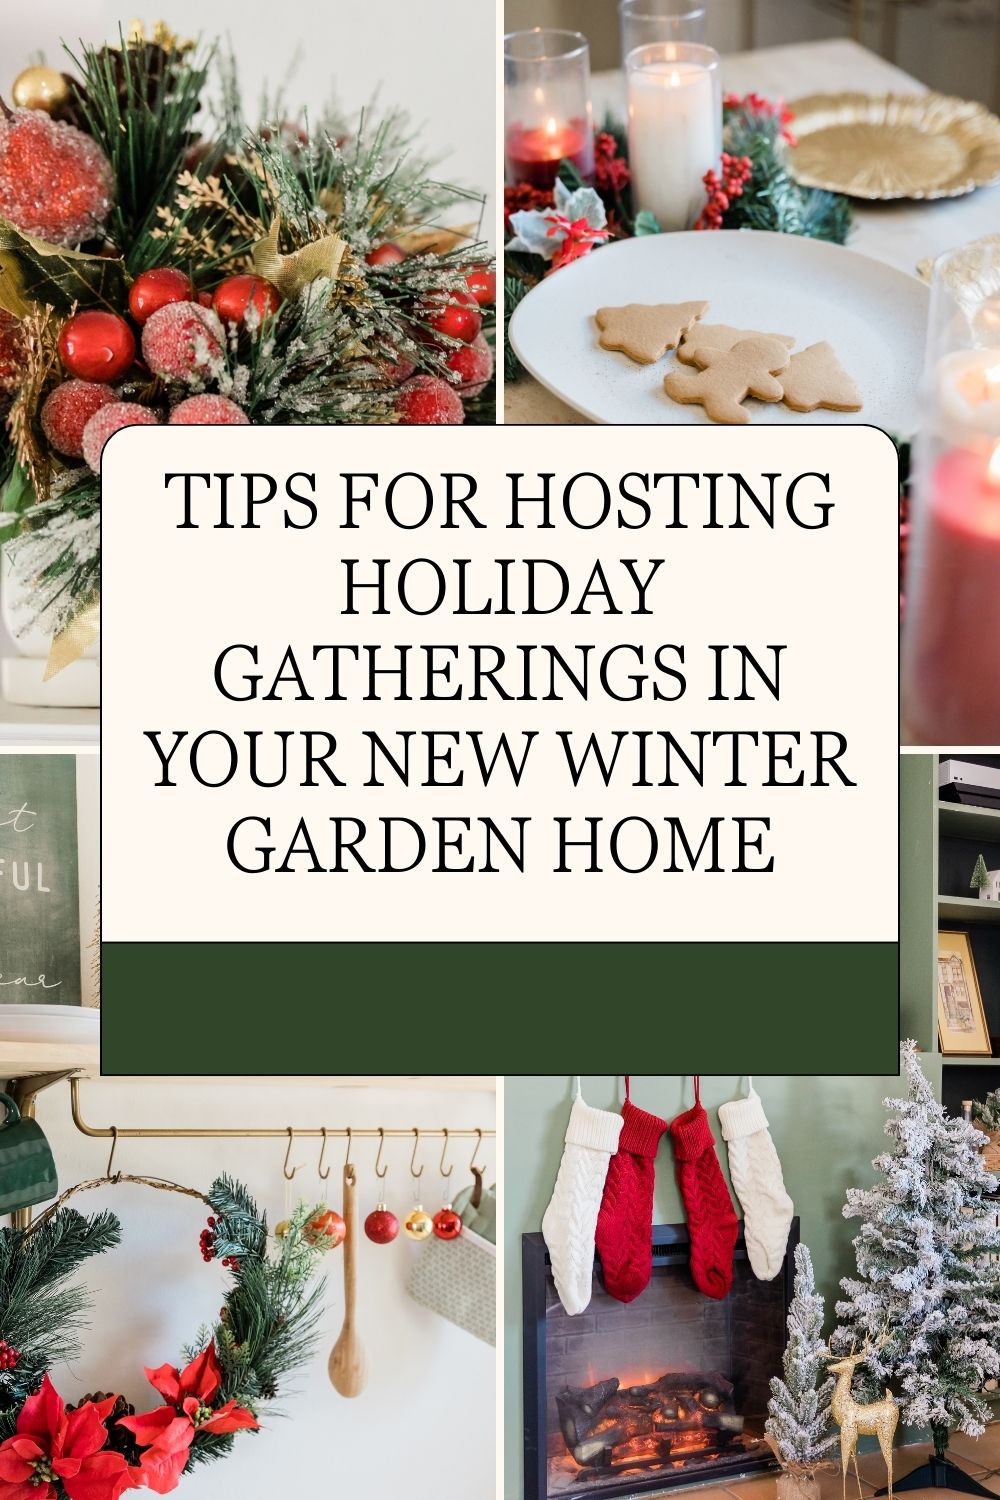 Tips for Hosting Holiday Gatherings in Your New Winter Garden Home